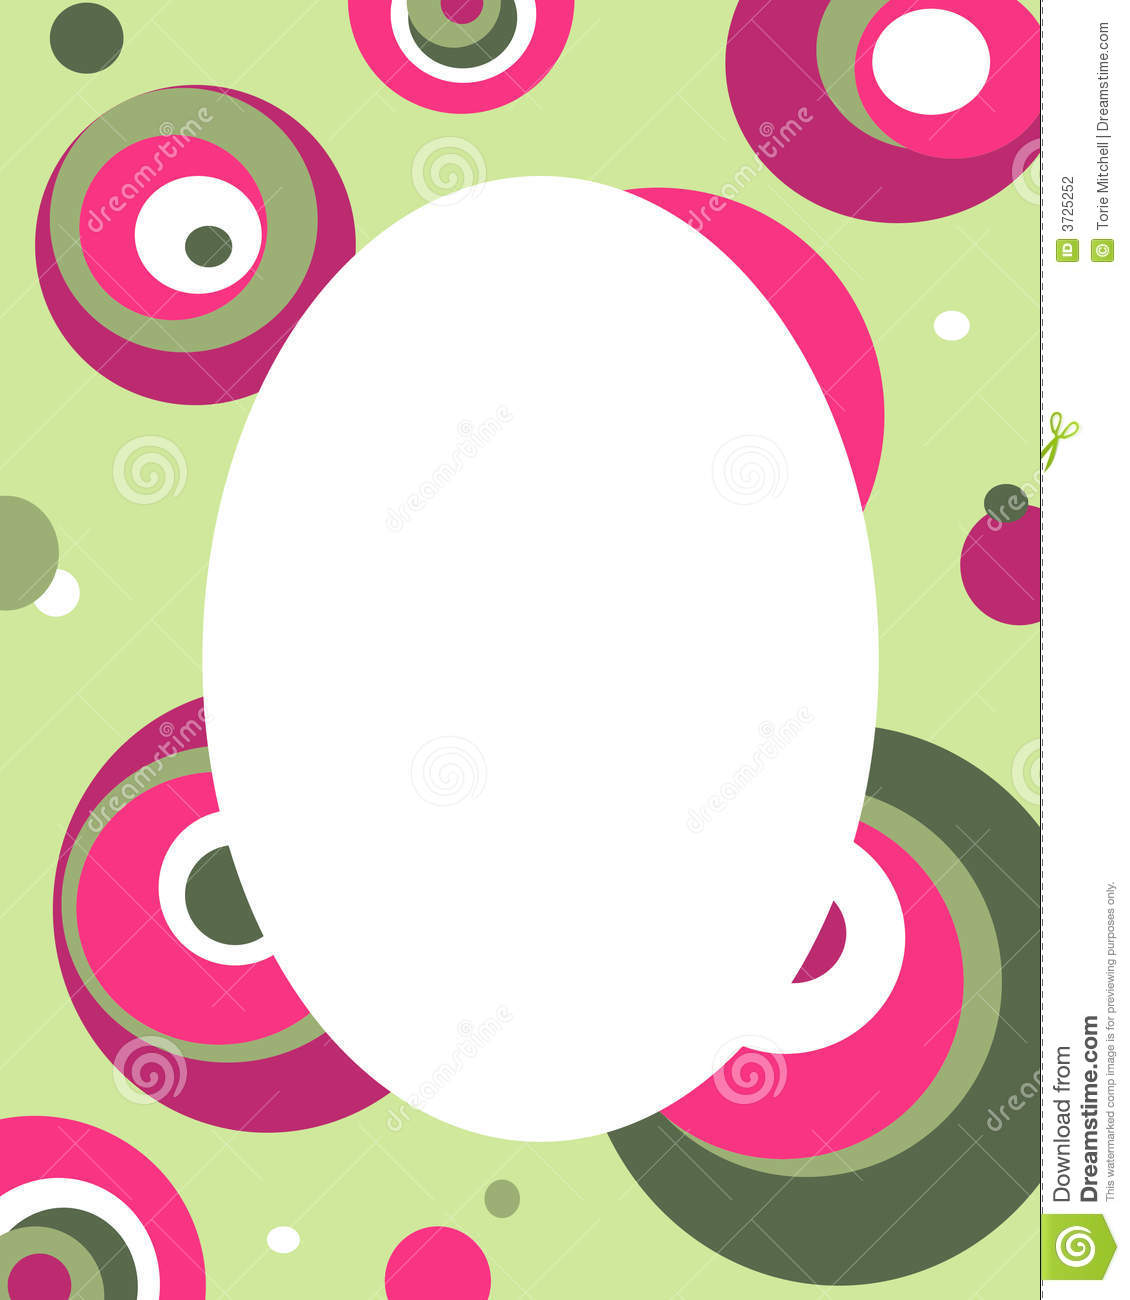 Green Background Picture Frame With Funky Pink And Green Circles In